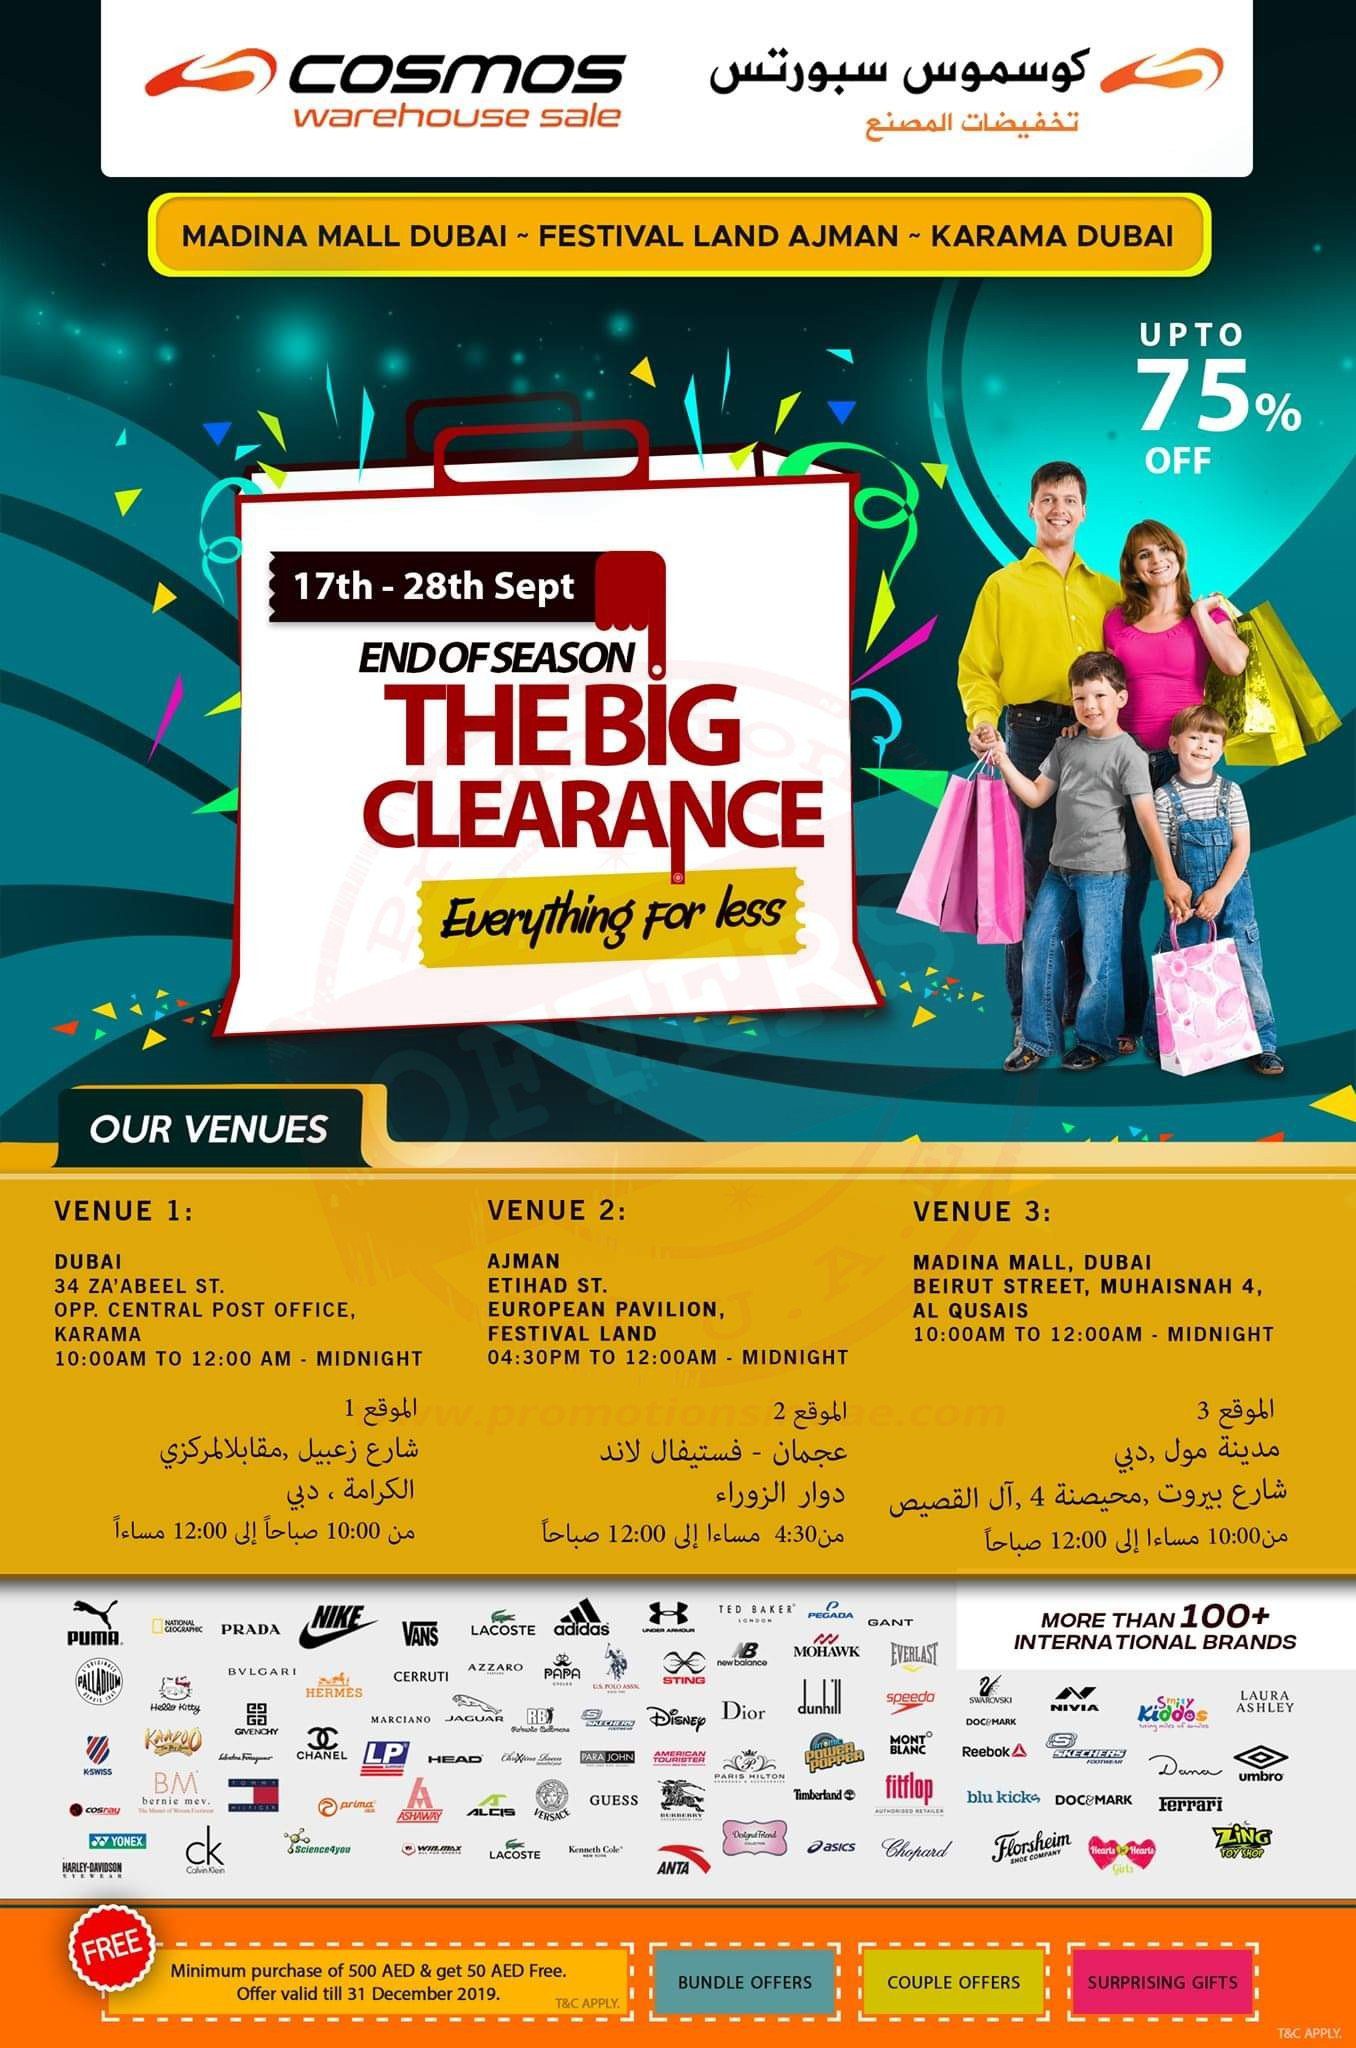 FB IMG 1568791602156 The Big CLEARANCE SALE. COSMOS Warehouse Sale